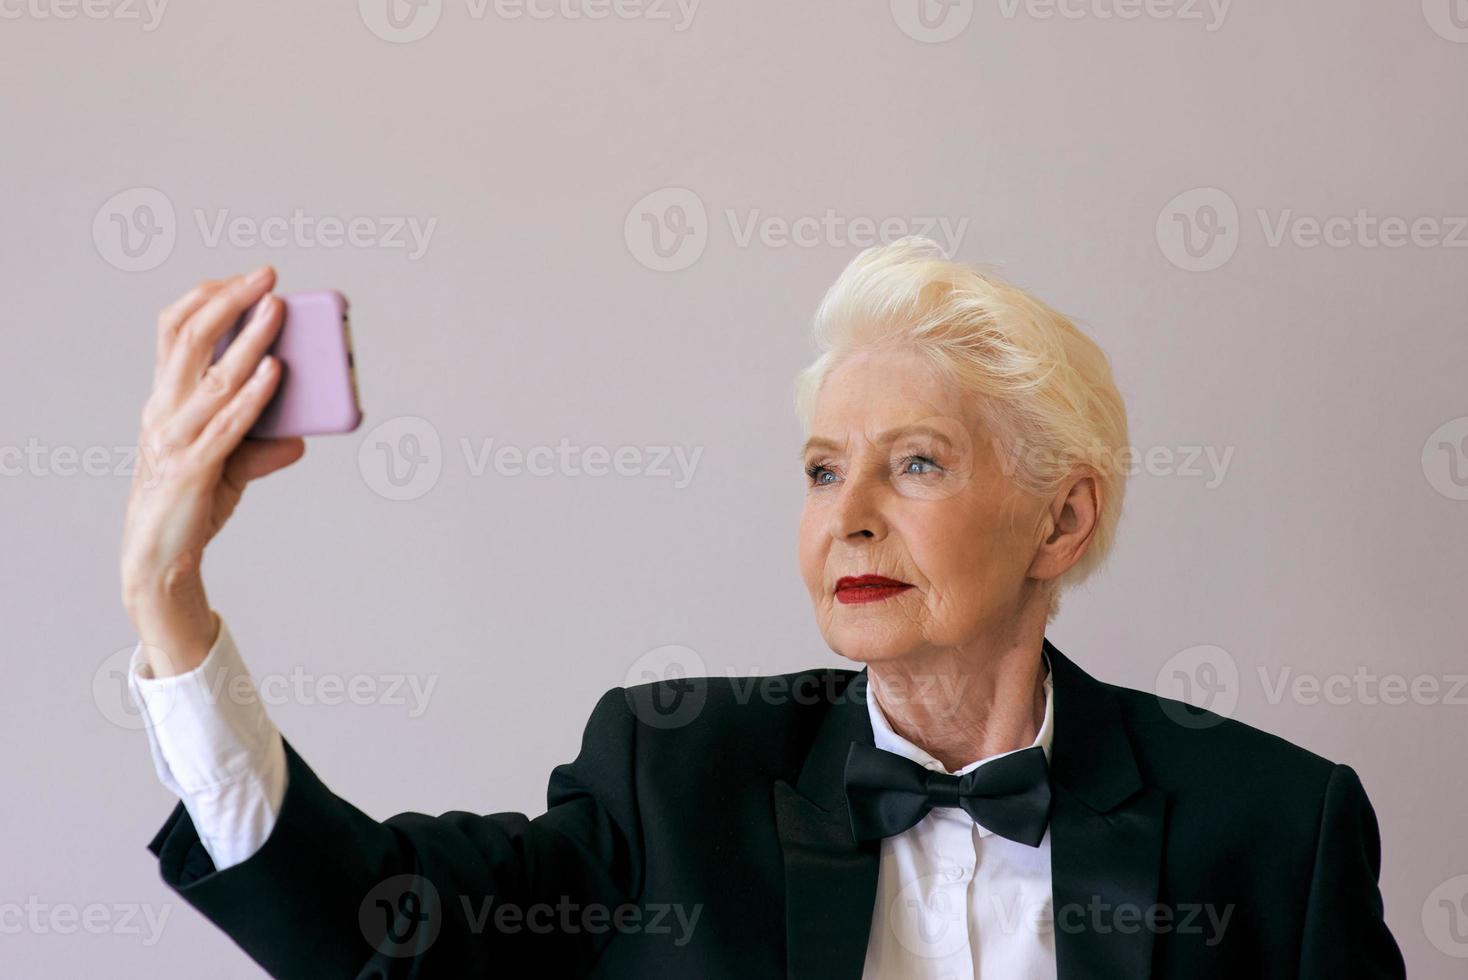 stylish mature senior woman in tuxedo with cellphone video calling or making selfie. Fun, party, style, lifestyle, business, technology, celebration concept photo